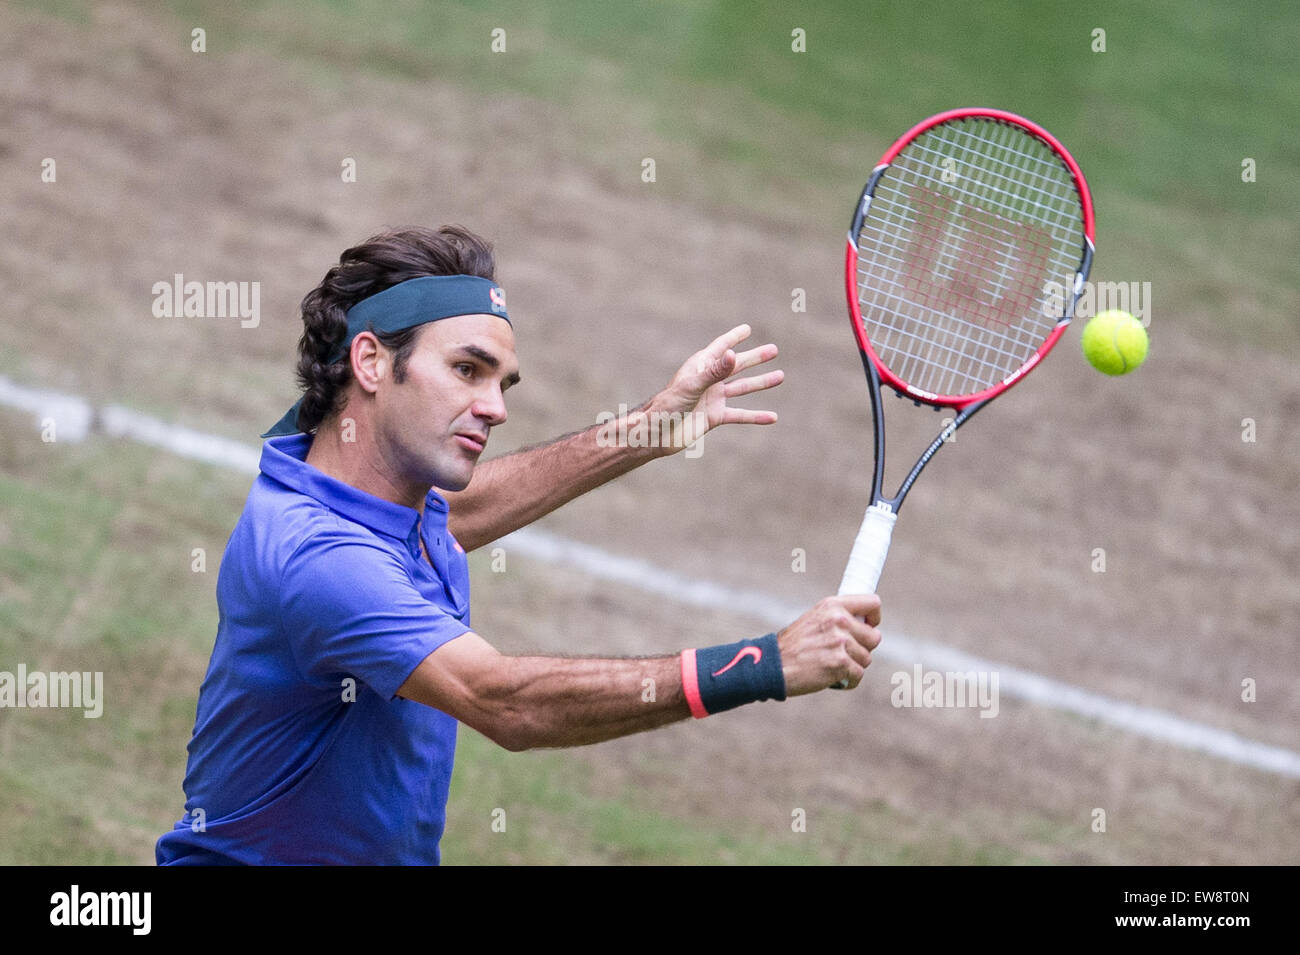 Halle, Germany. 20th June, 2015. Roger Federer of Switzerland during the  semifinal match against Ivo Karlovic of Croatia in the ATP tennis tournament  in Halle, Germany, 20 June 2015. Photo: MAJA HITIJ/dpa/Alamy